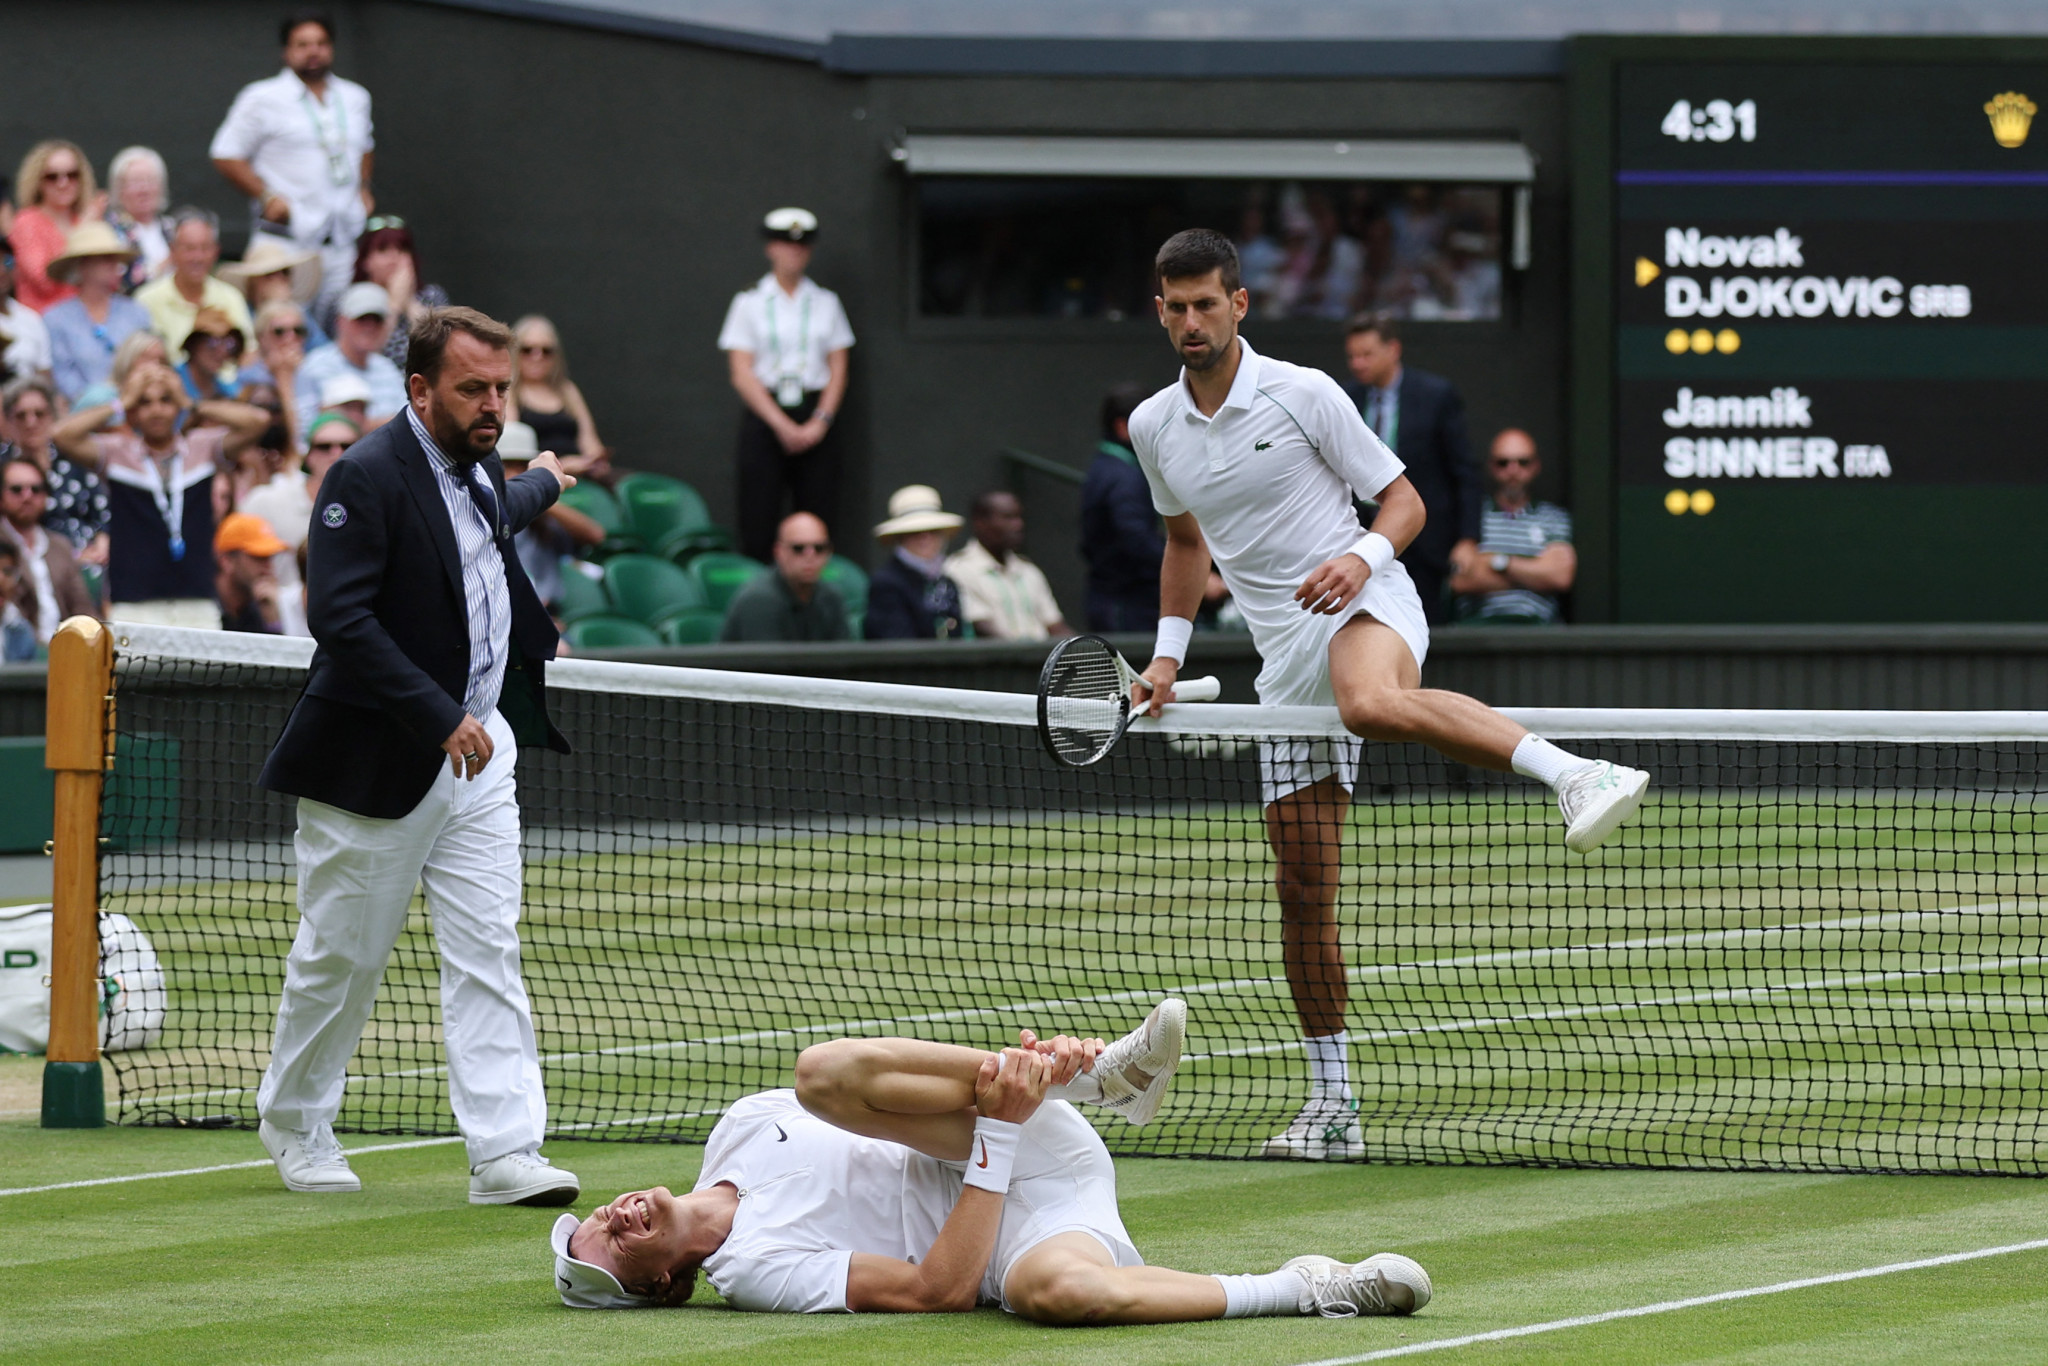 Novak Djokovic checking on Jannik Sinner after his opponent went down with an injury ©Getty Images